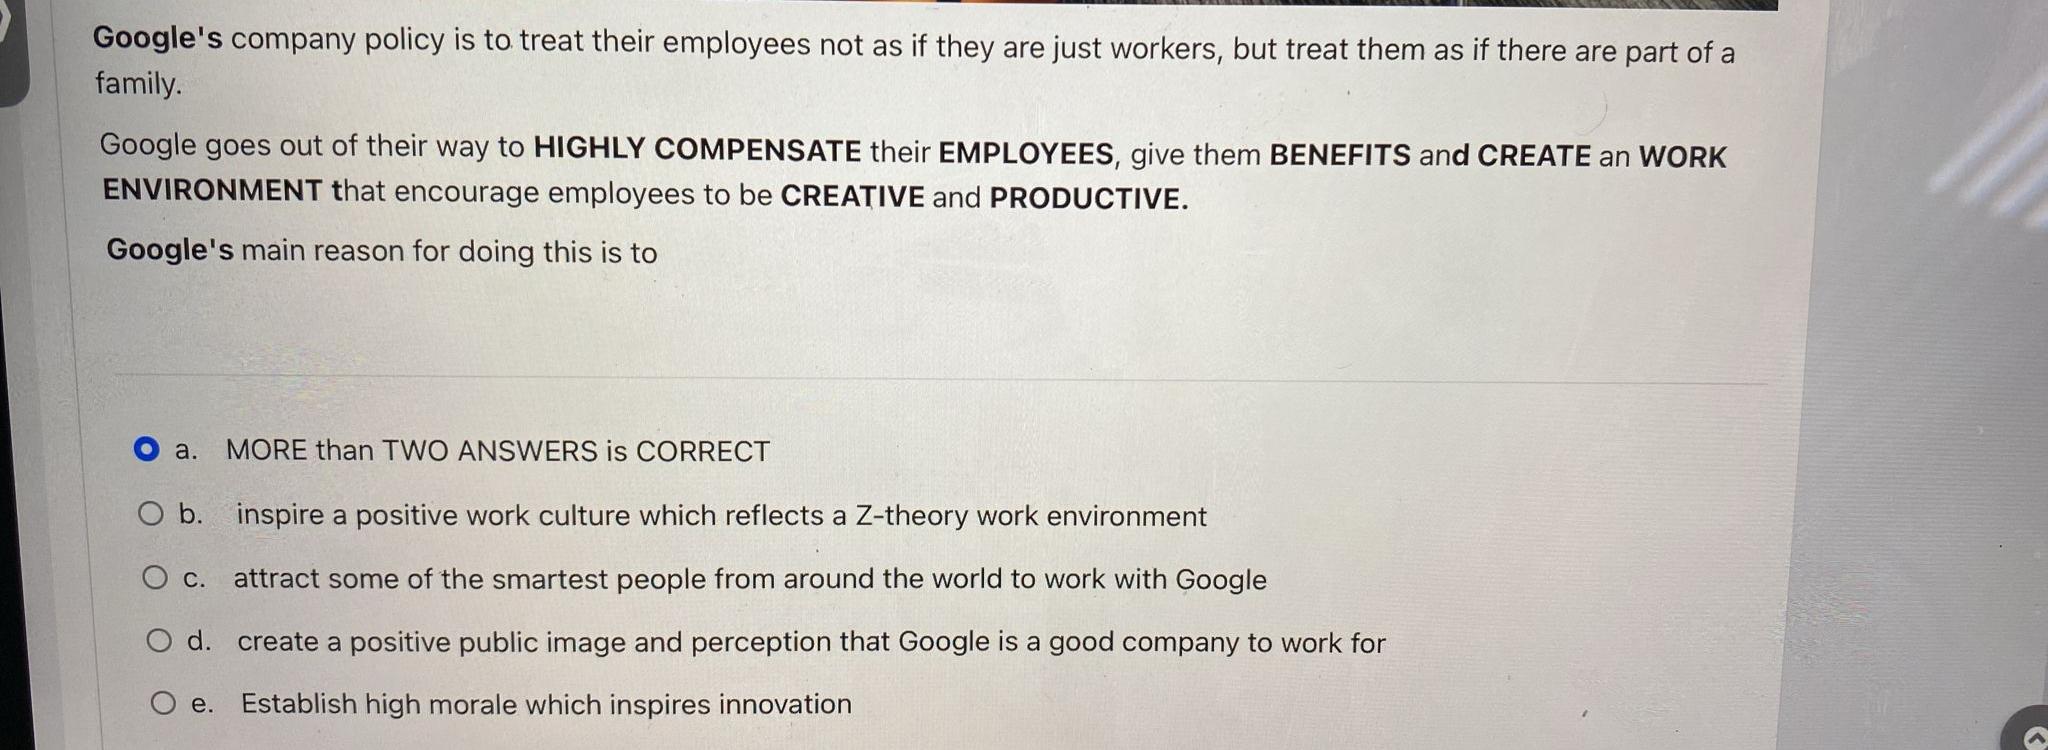 Google's company policy is to treat their employees not as if they are just workers, but treat them as if